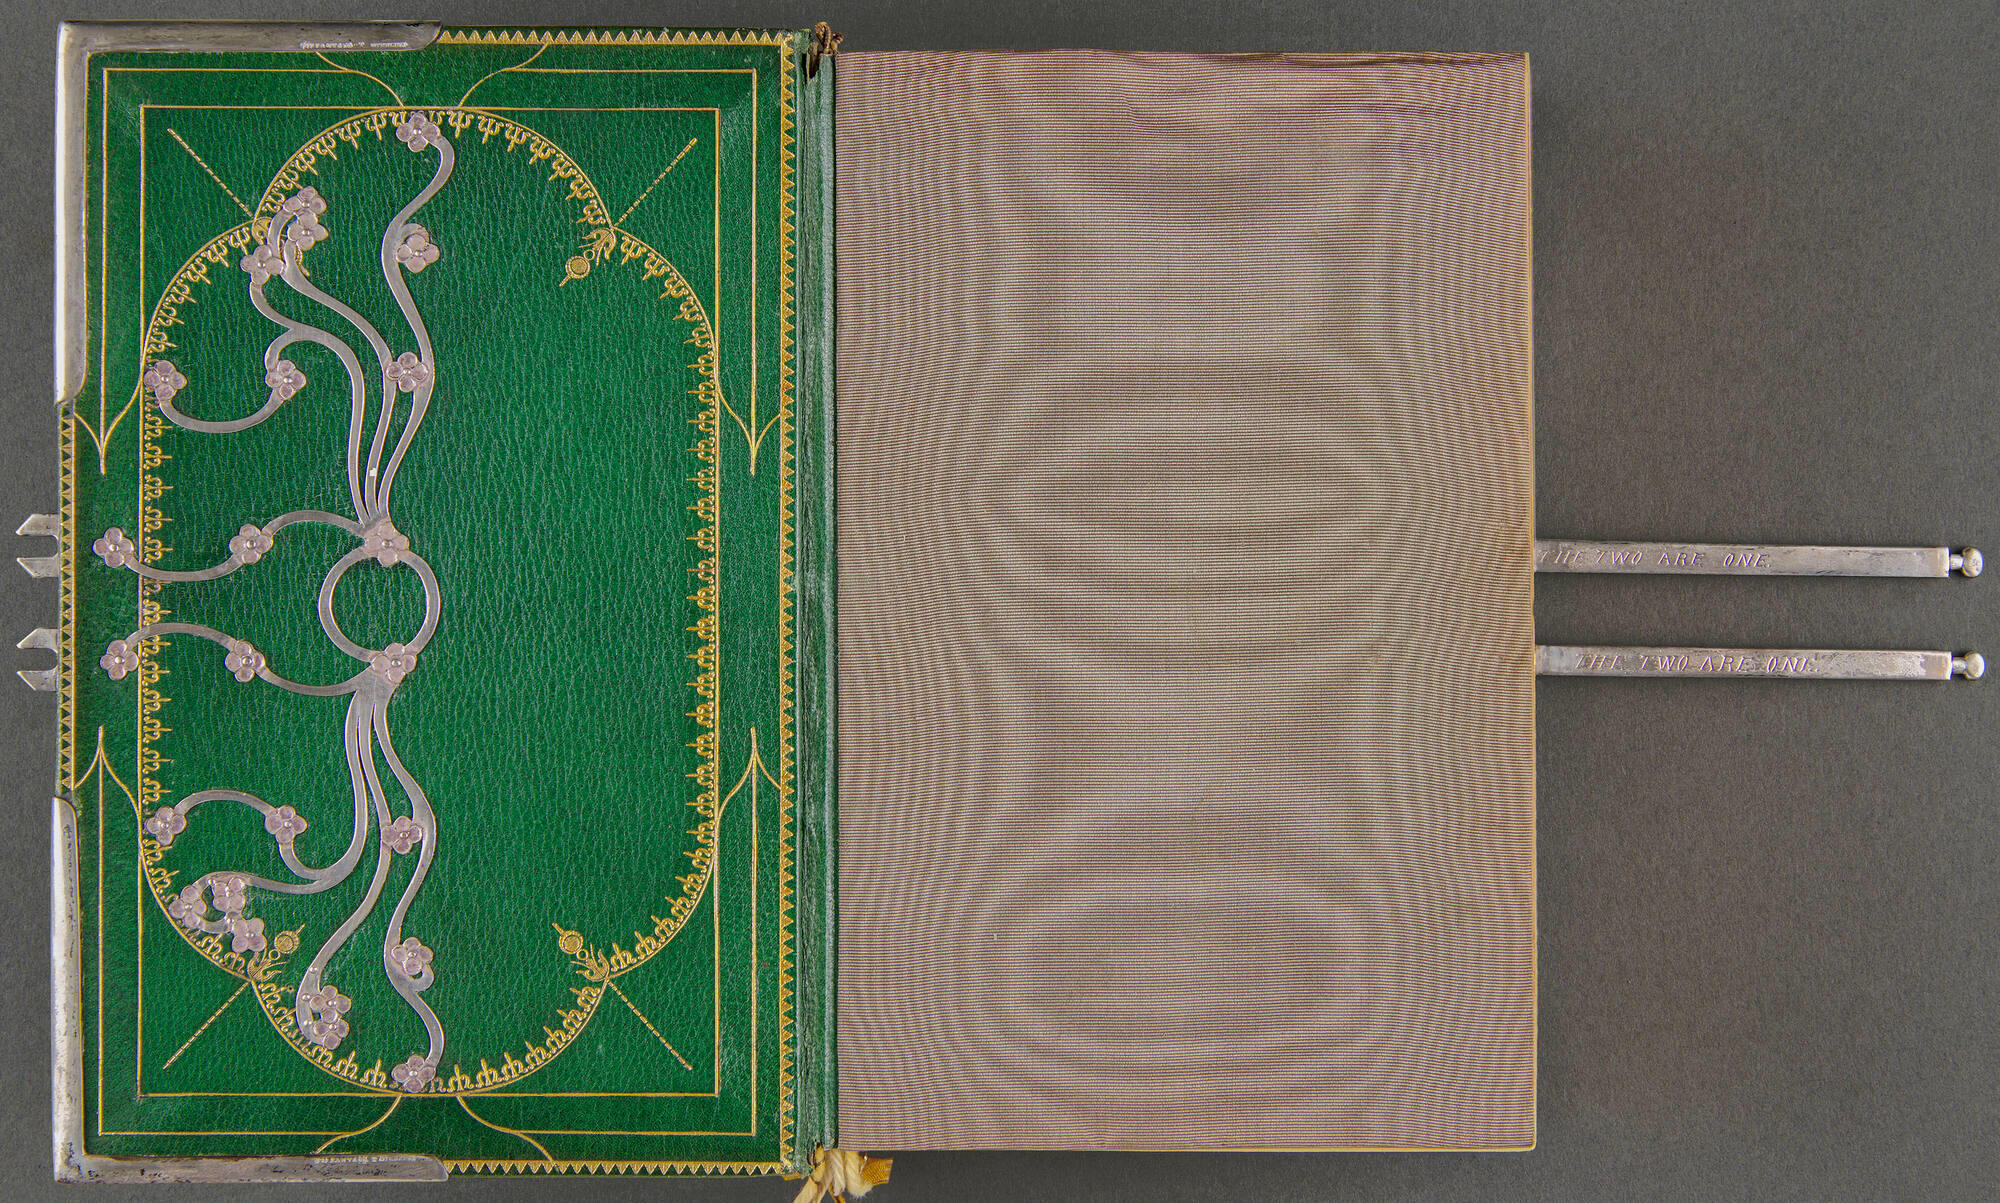 A book bound in green leather with silver decoration and a silk lining.